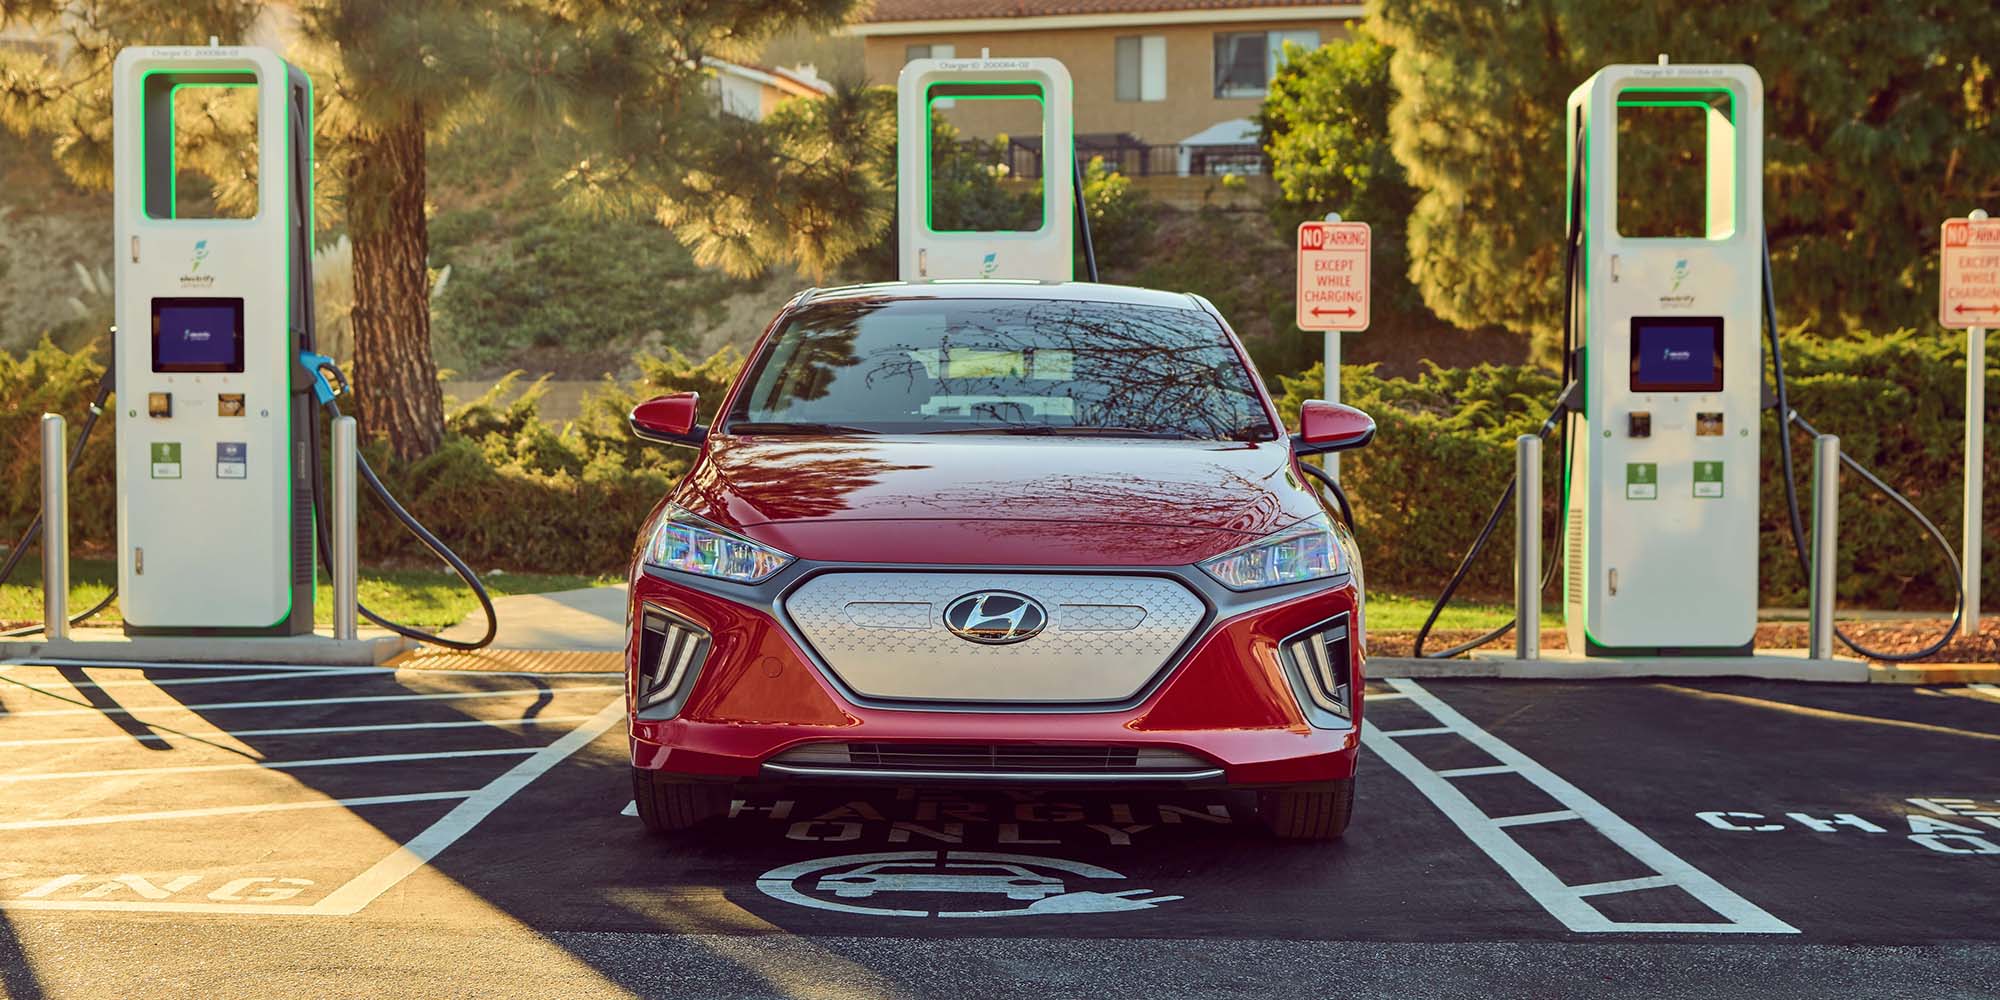 The cheapest electric vehicles available in 2021-2022